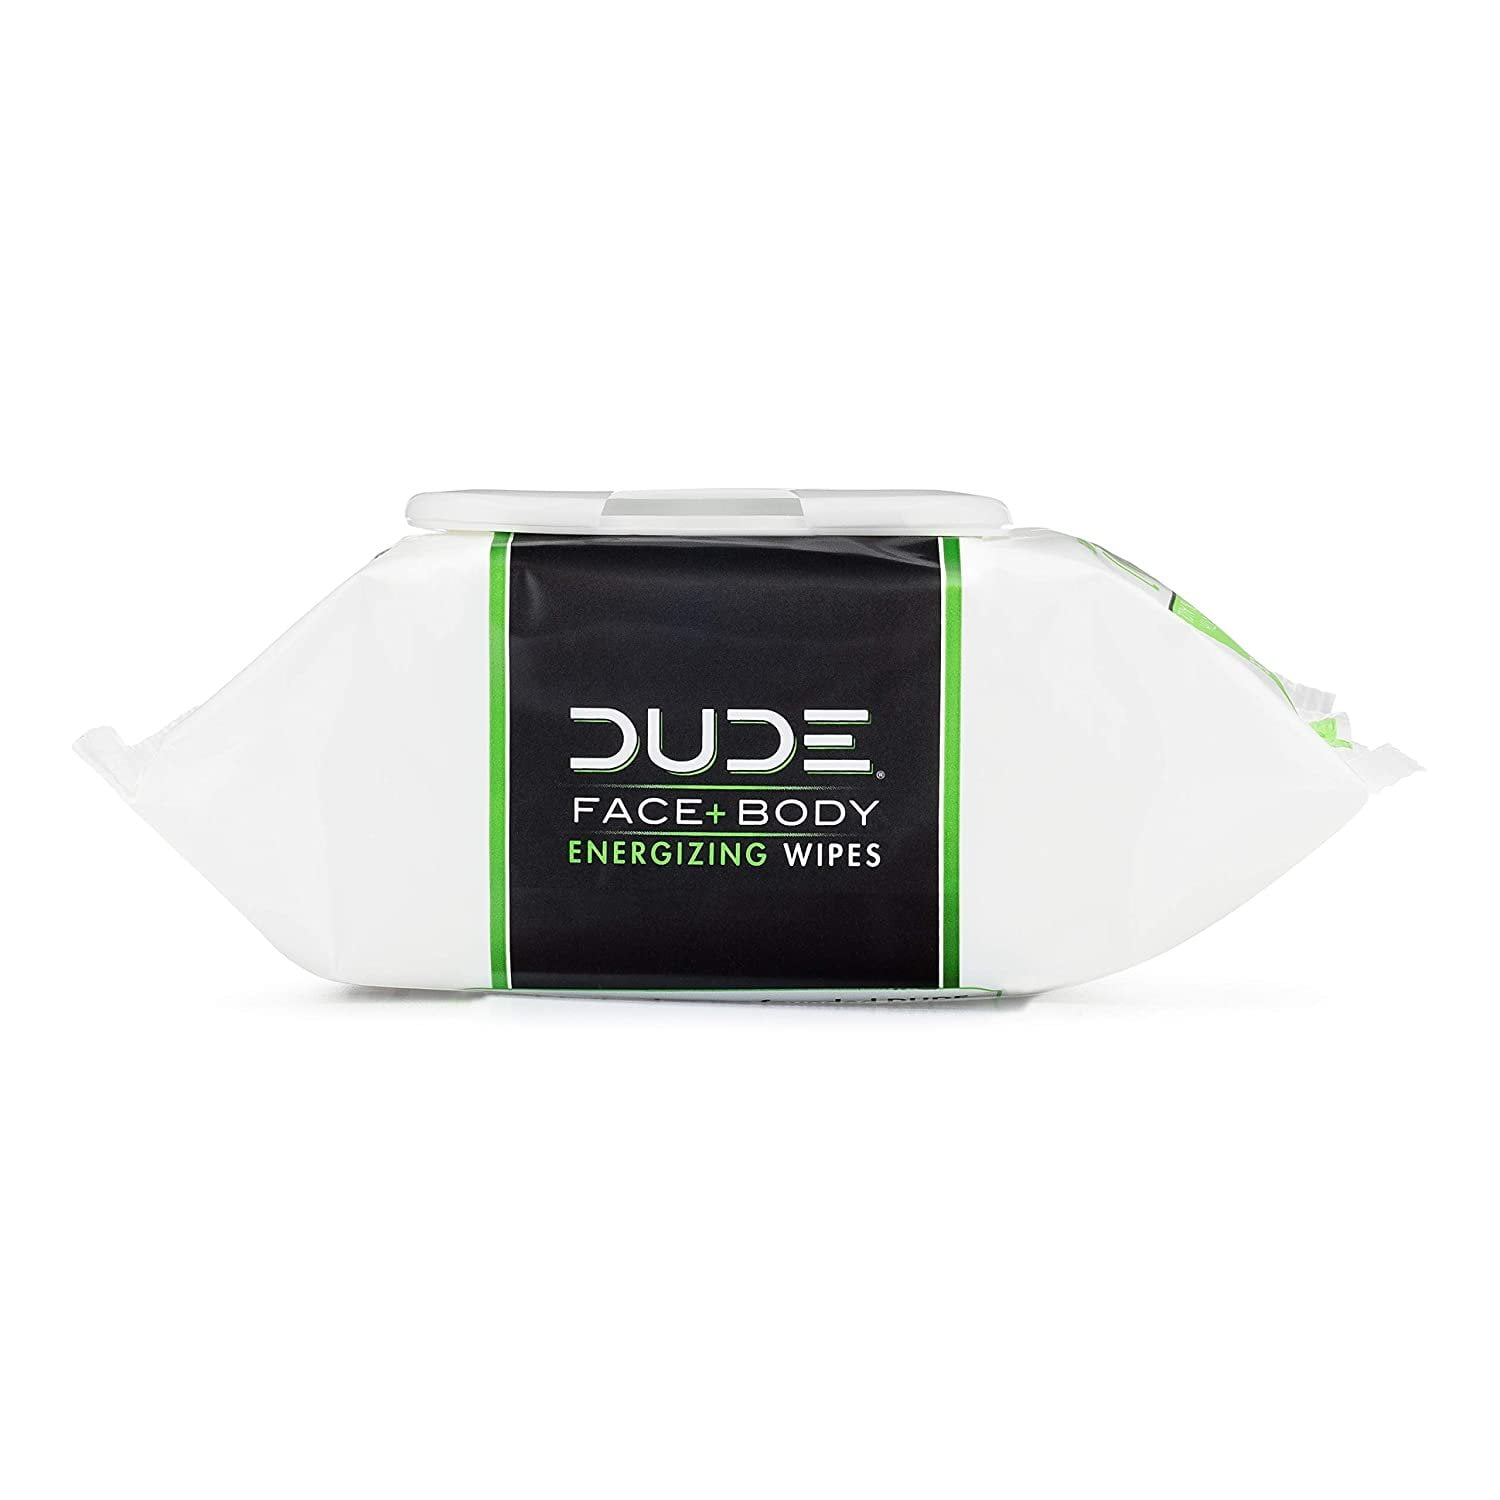 DUDE Face Wipes For Men, 3 IN 1 Usage, Energizing Plant Based